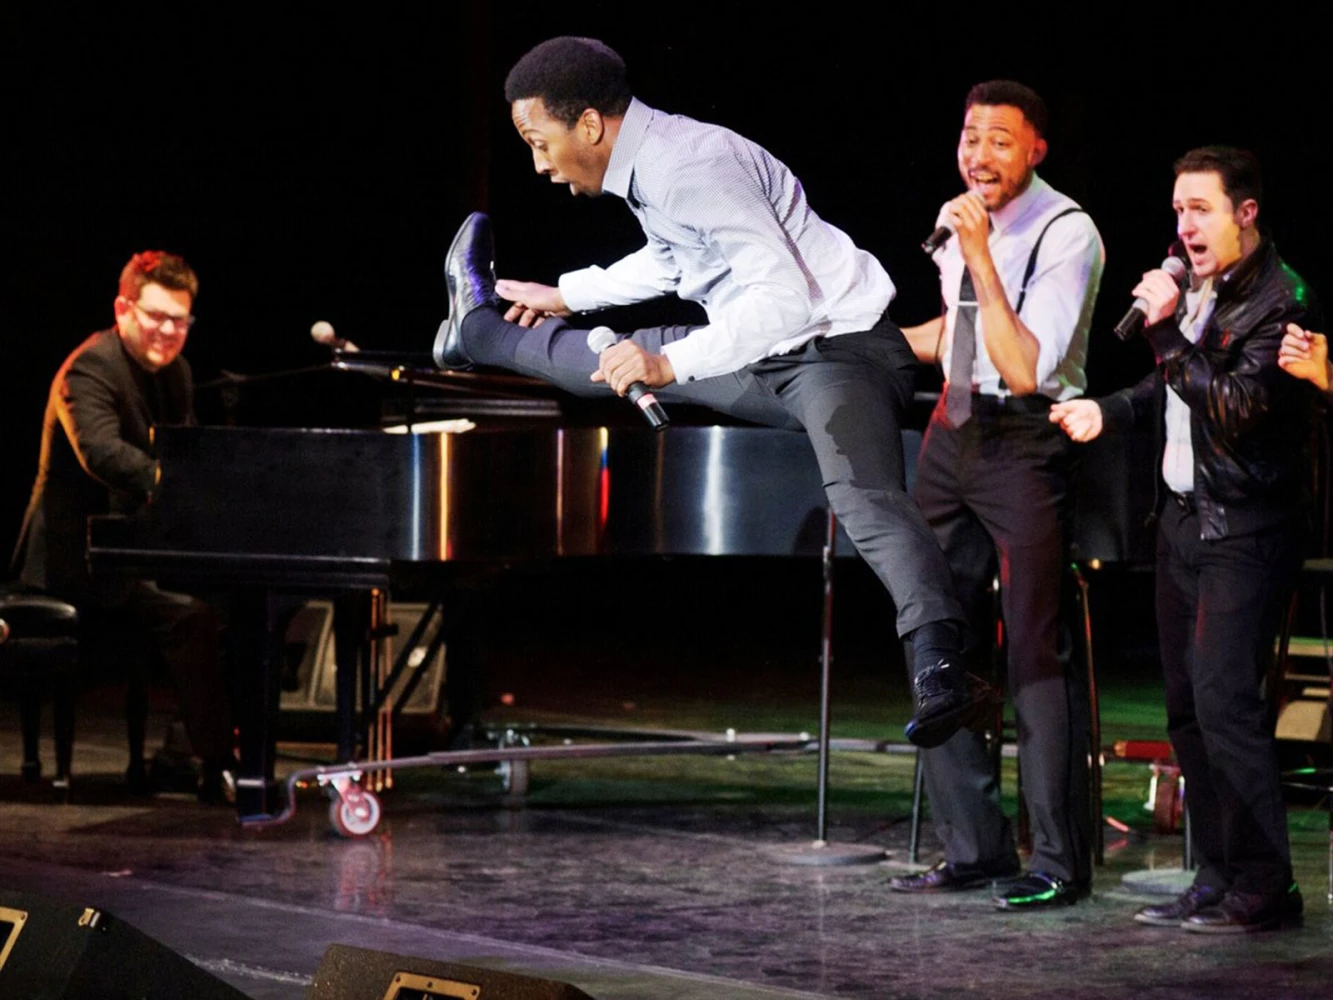 Rock 'N Roll Doo Wop Spectacular featuring Chubby Checker: What to expect - 2